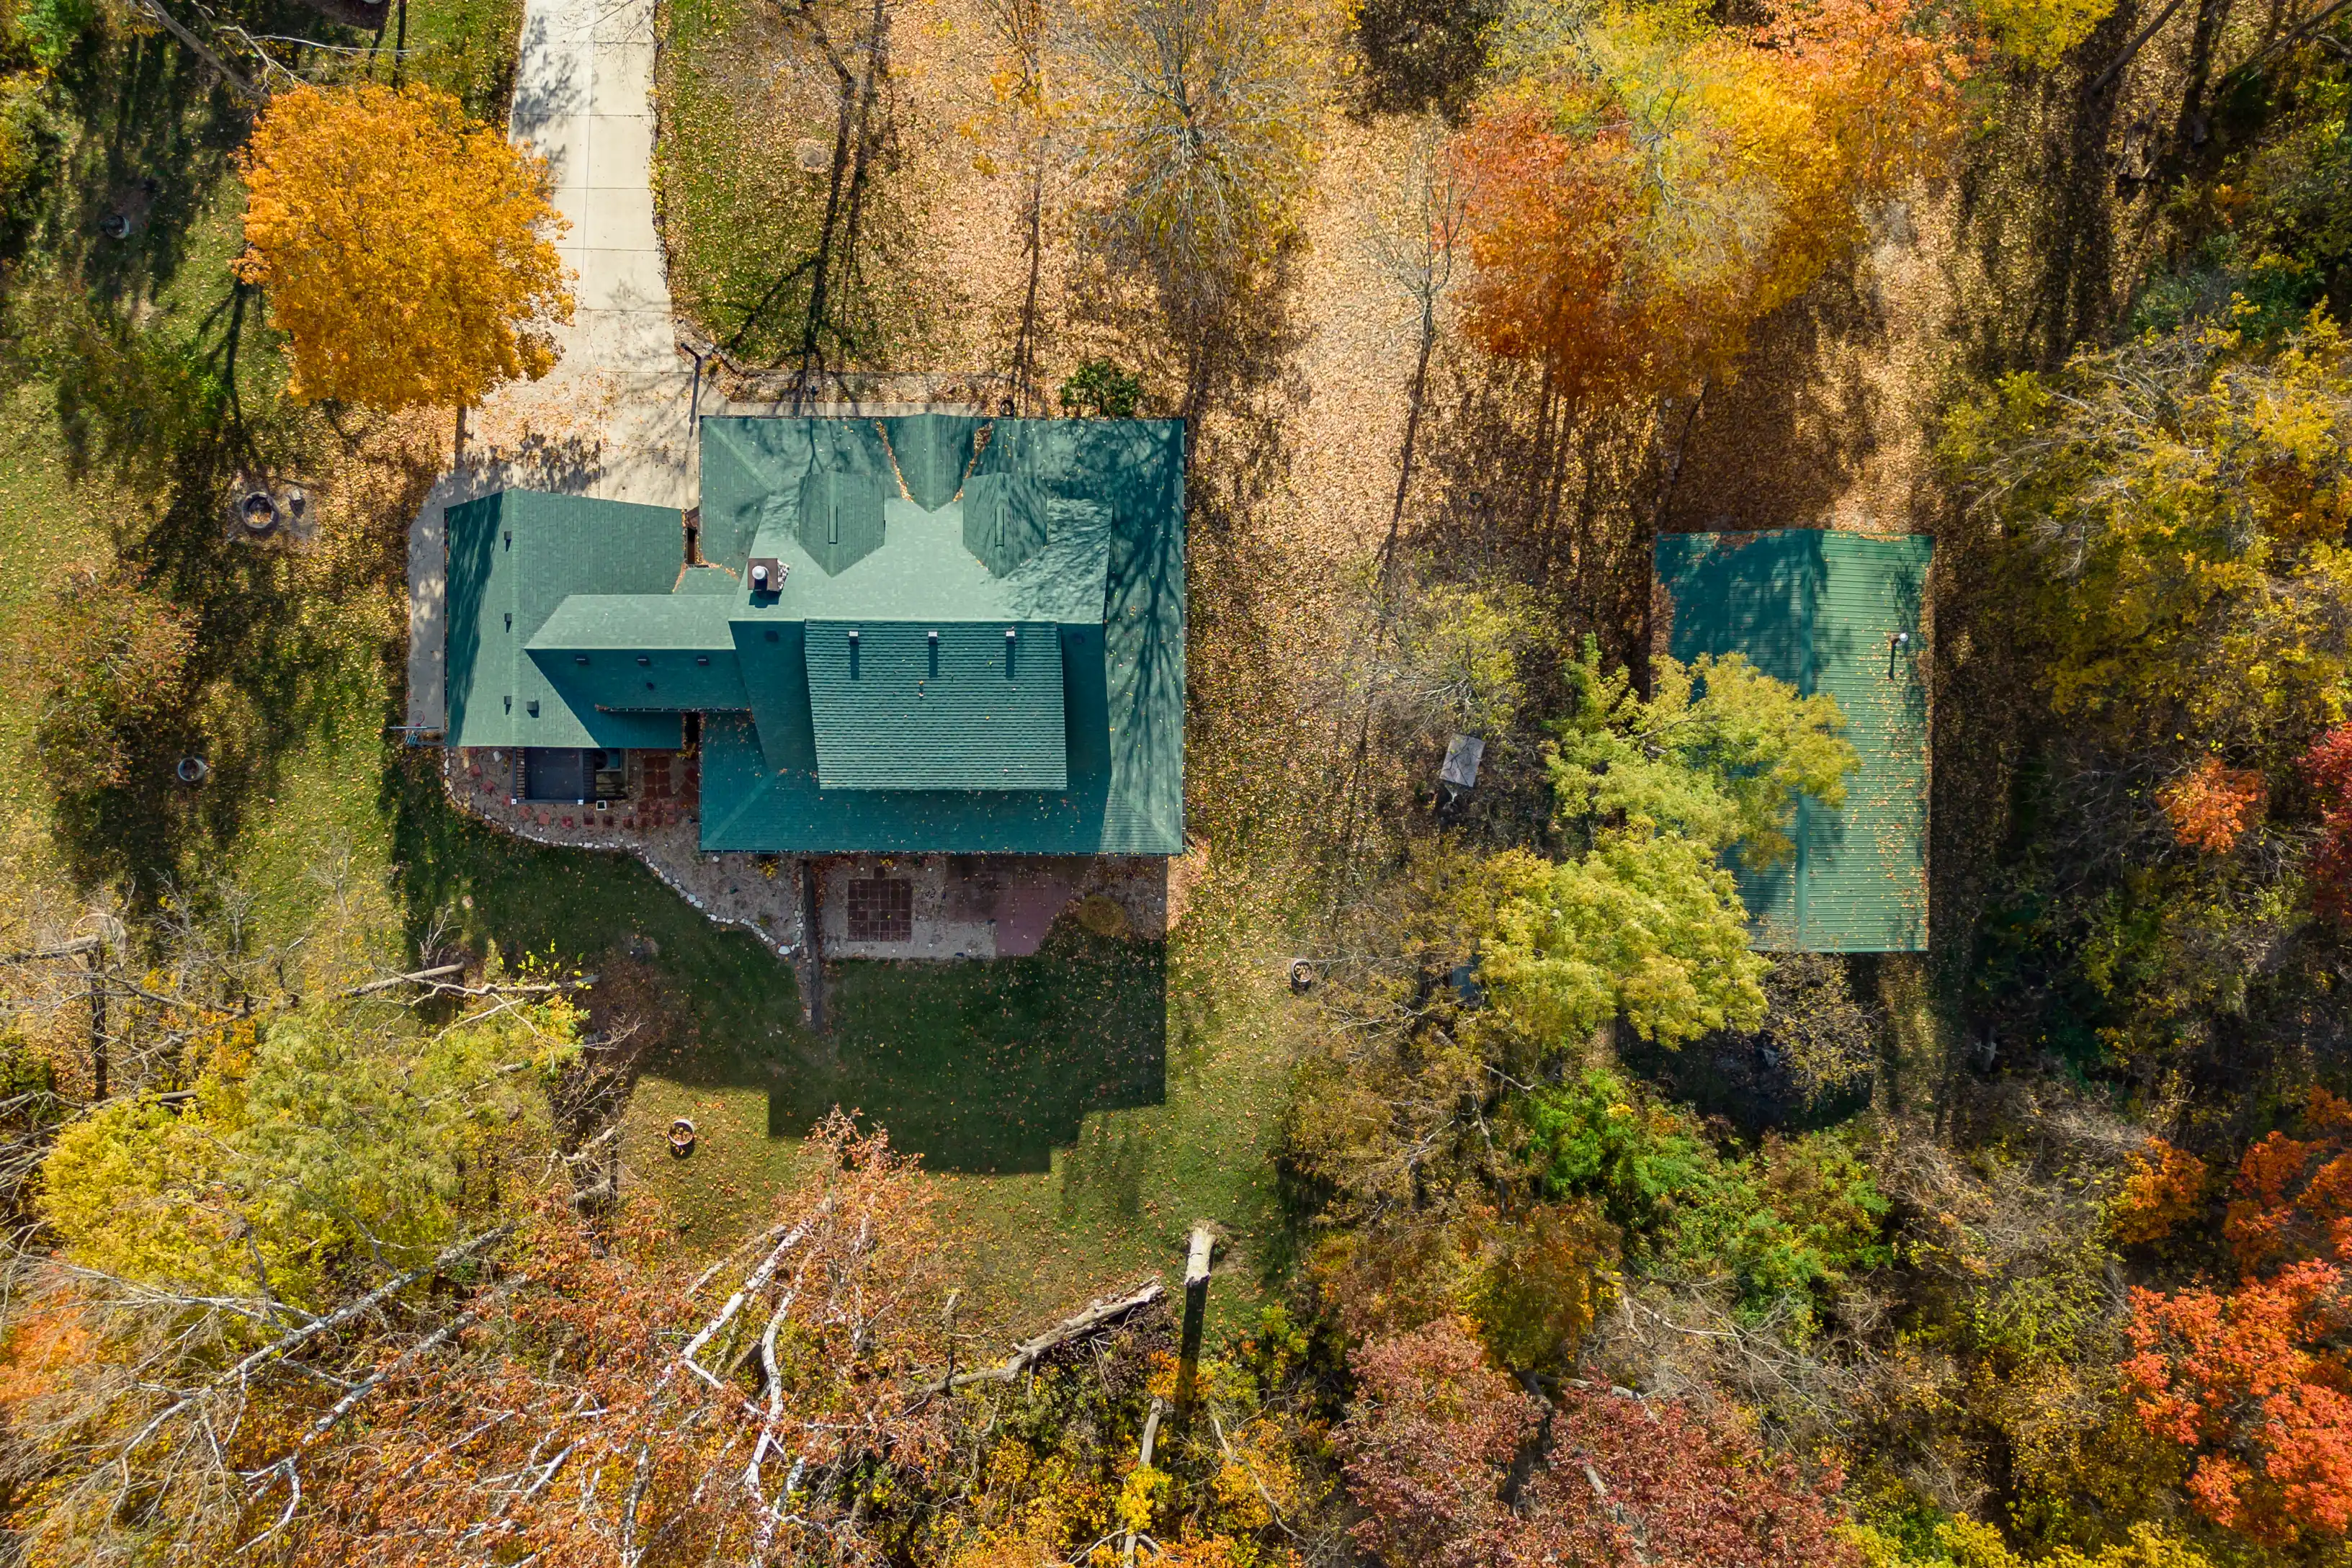 Aerial view of two houses with green roofs surrounded by trees with autumn foliage.